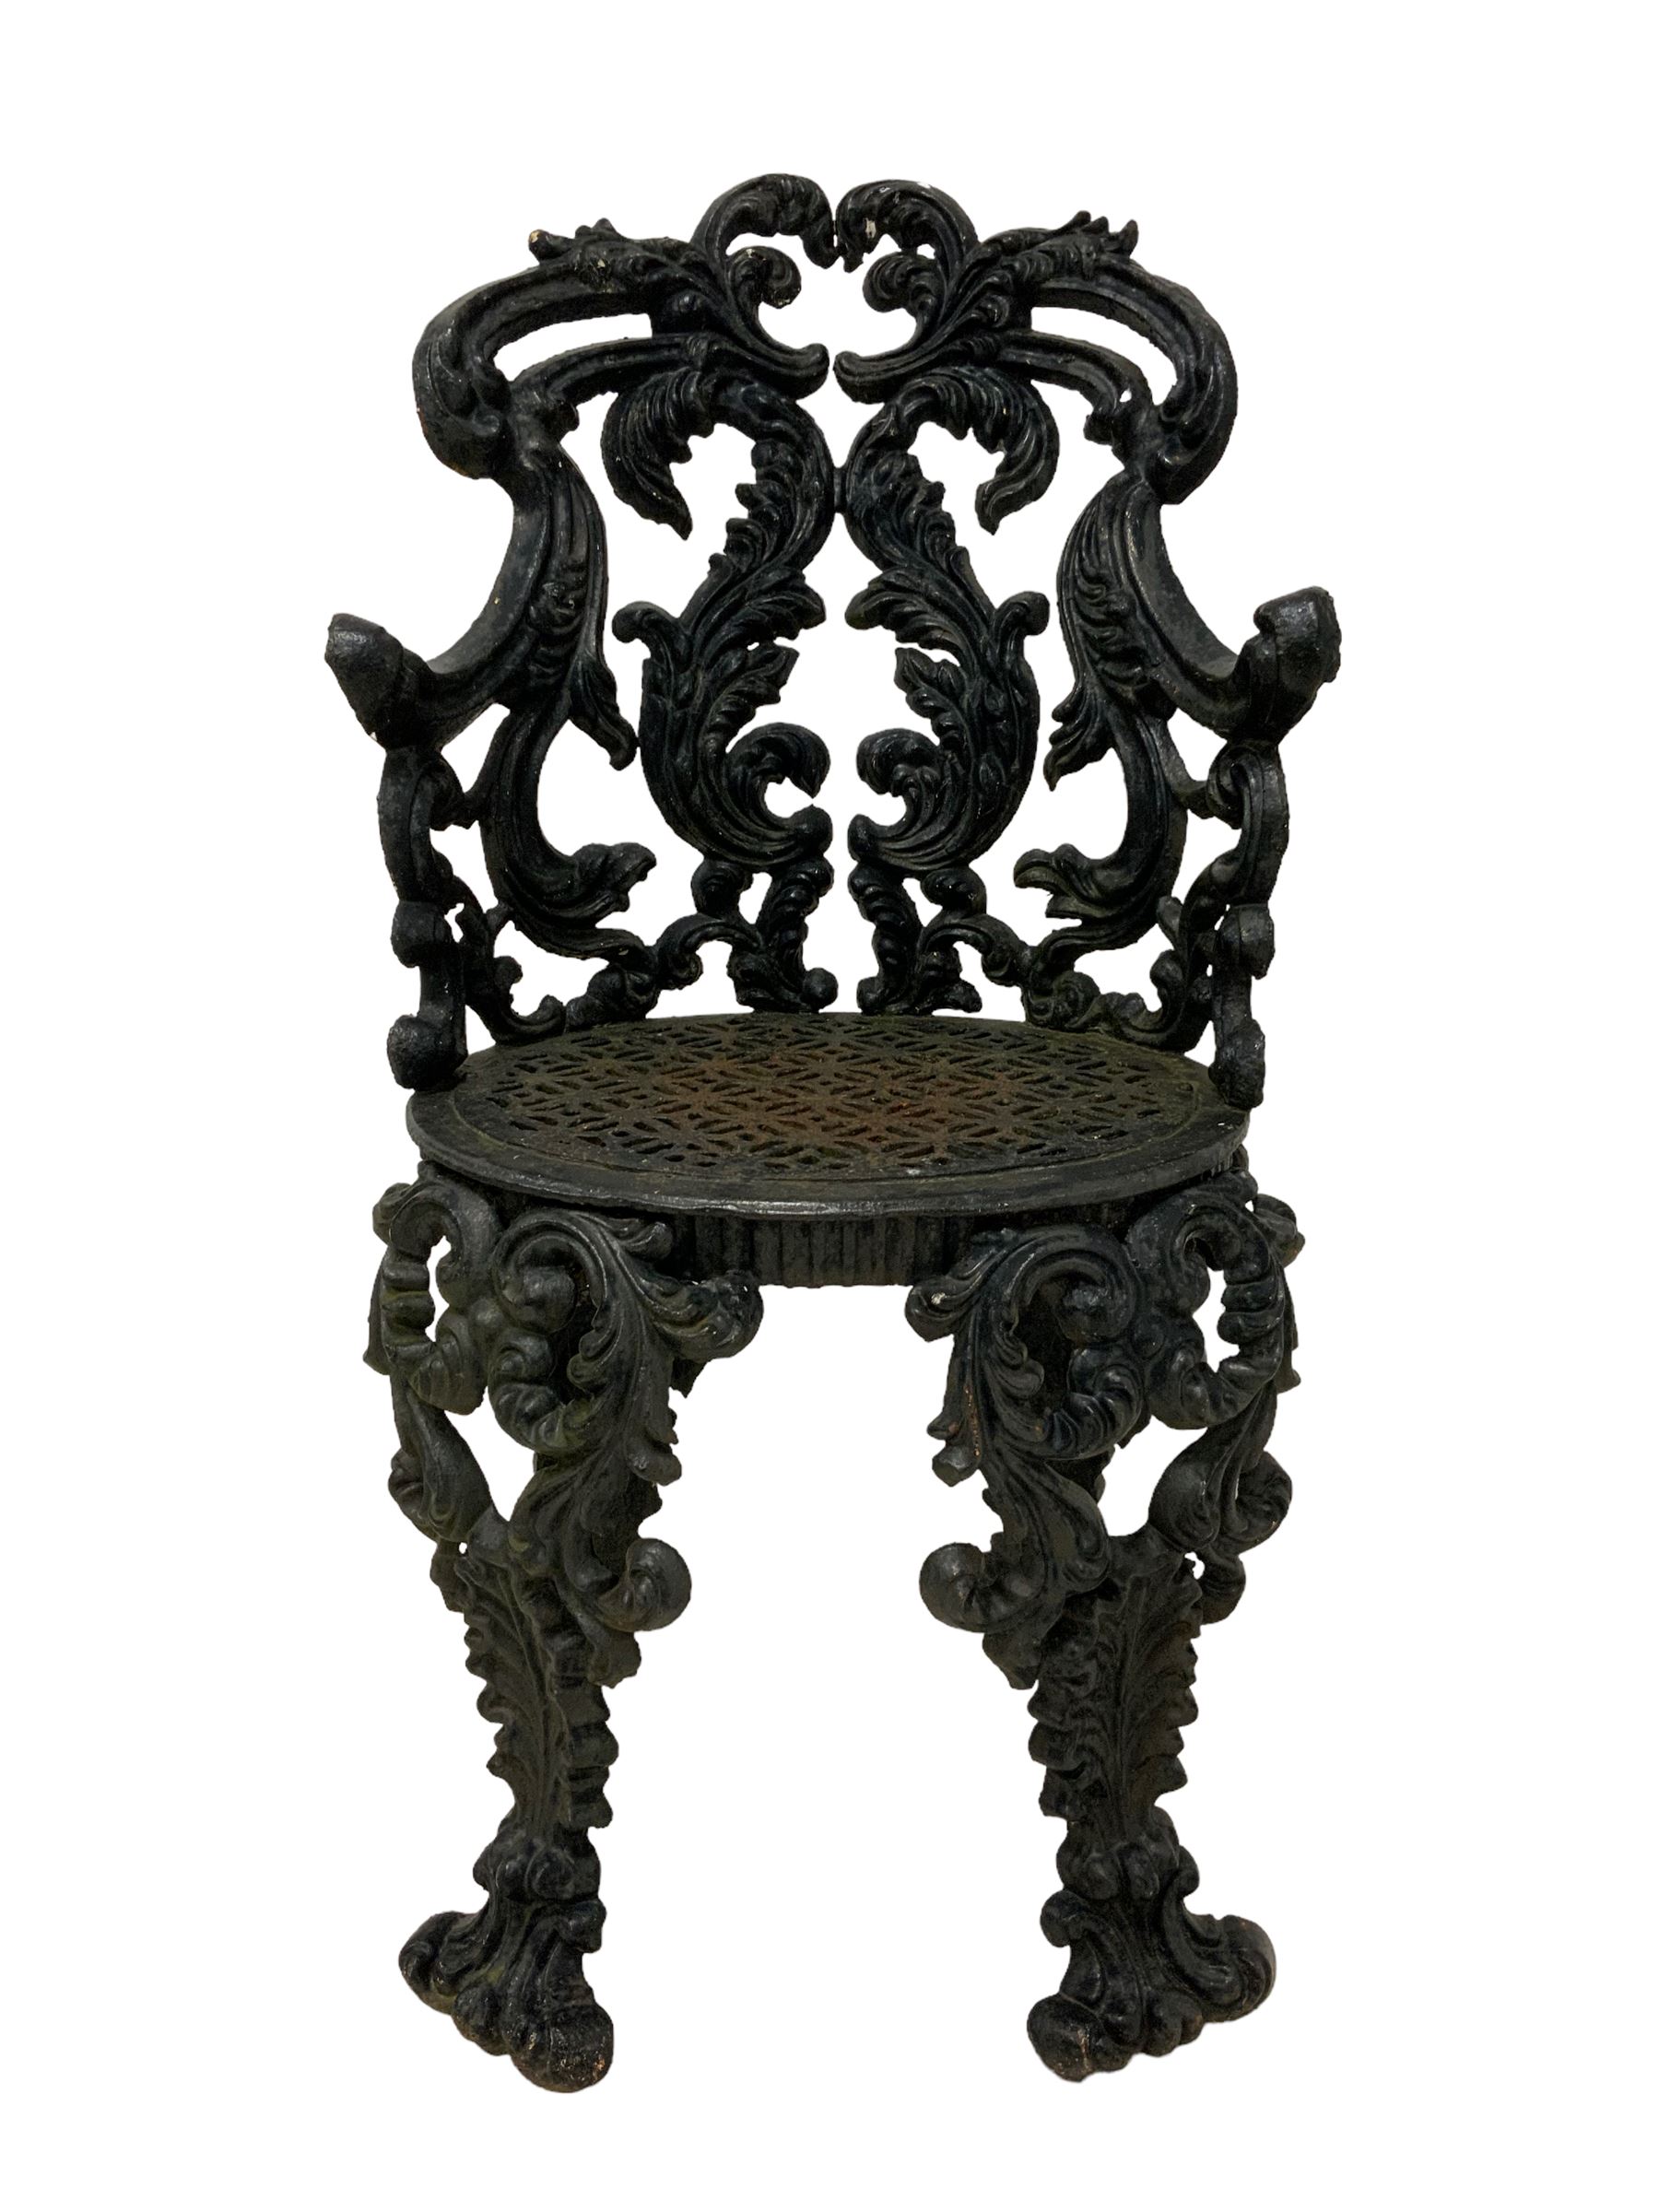 Late 19th century painted heavy ornate cast iron garden chair